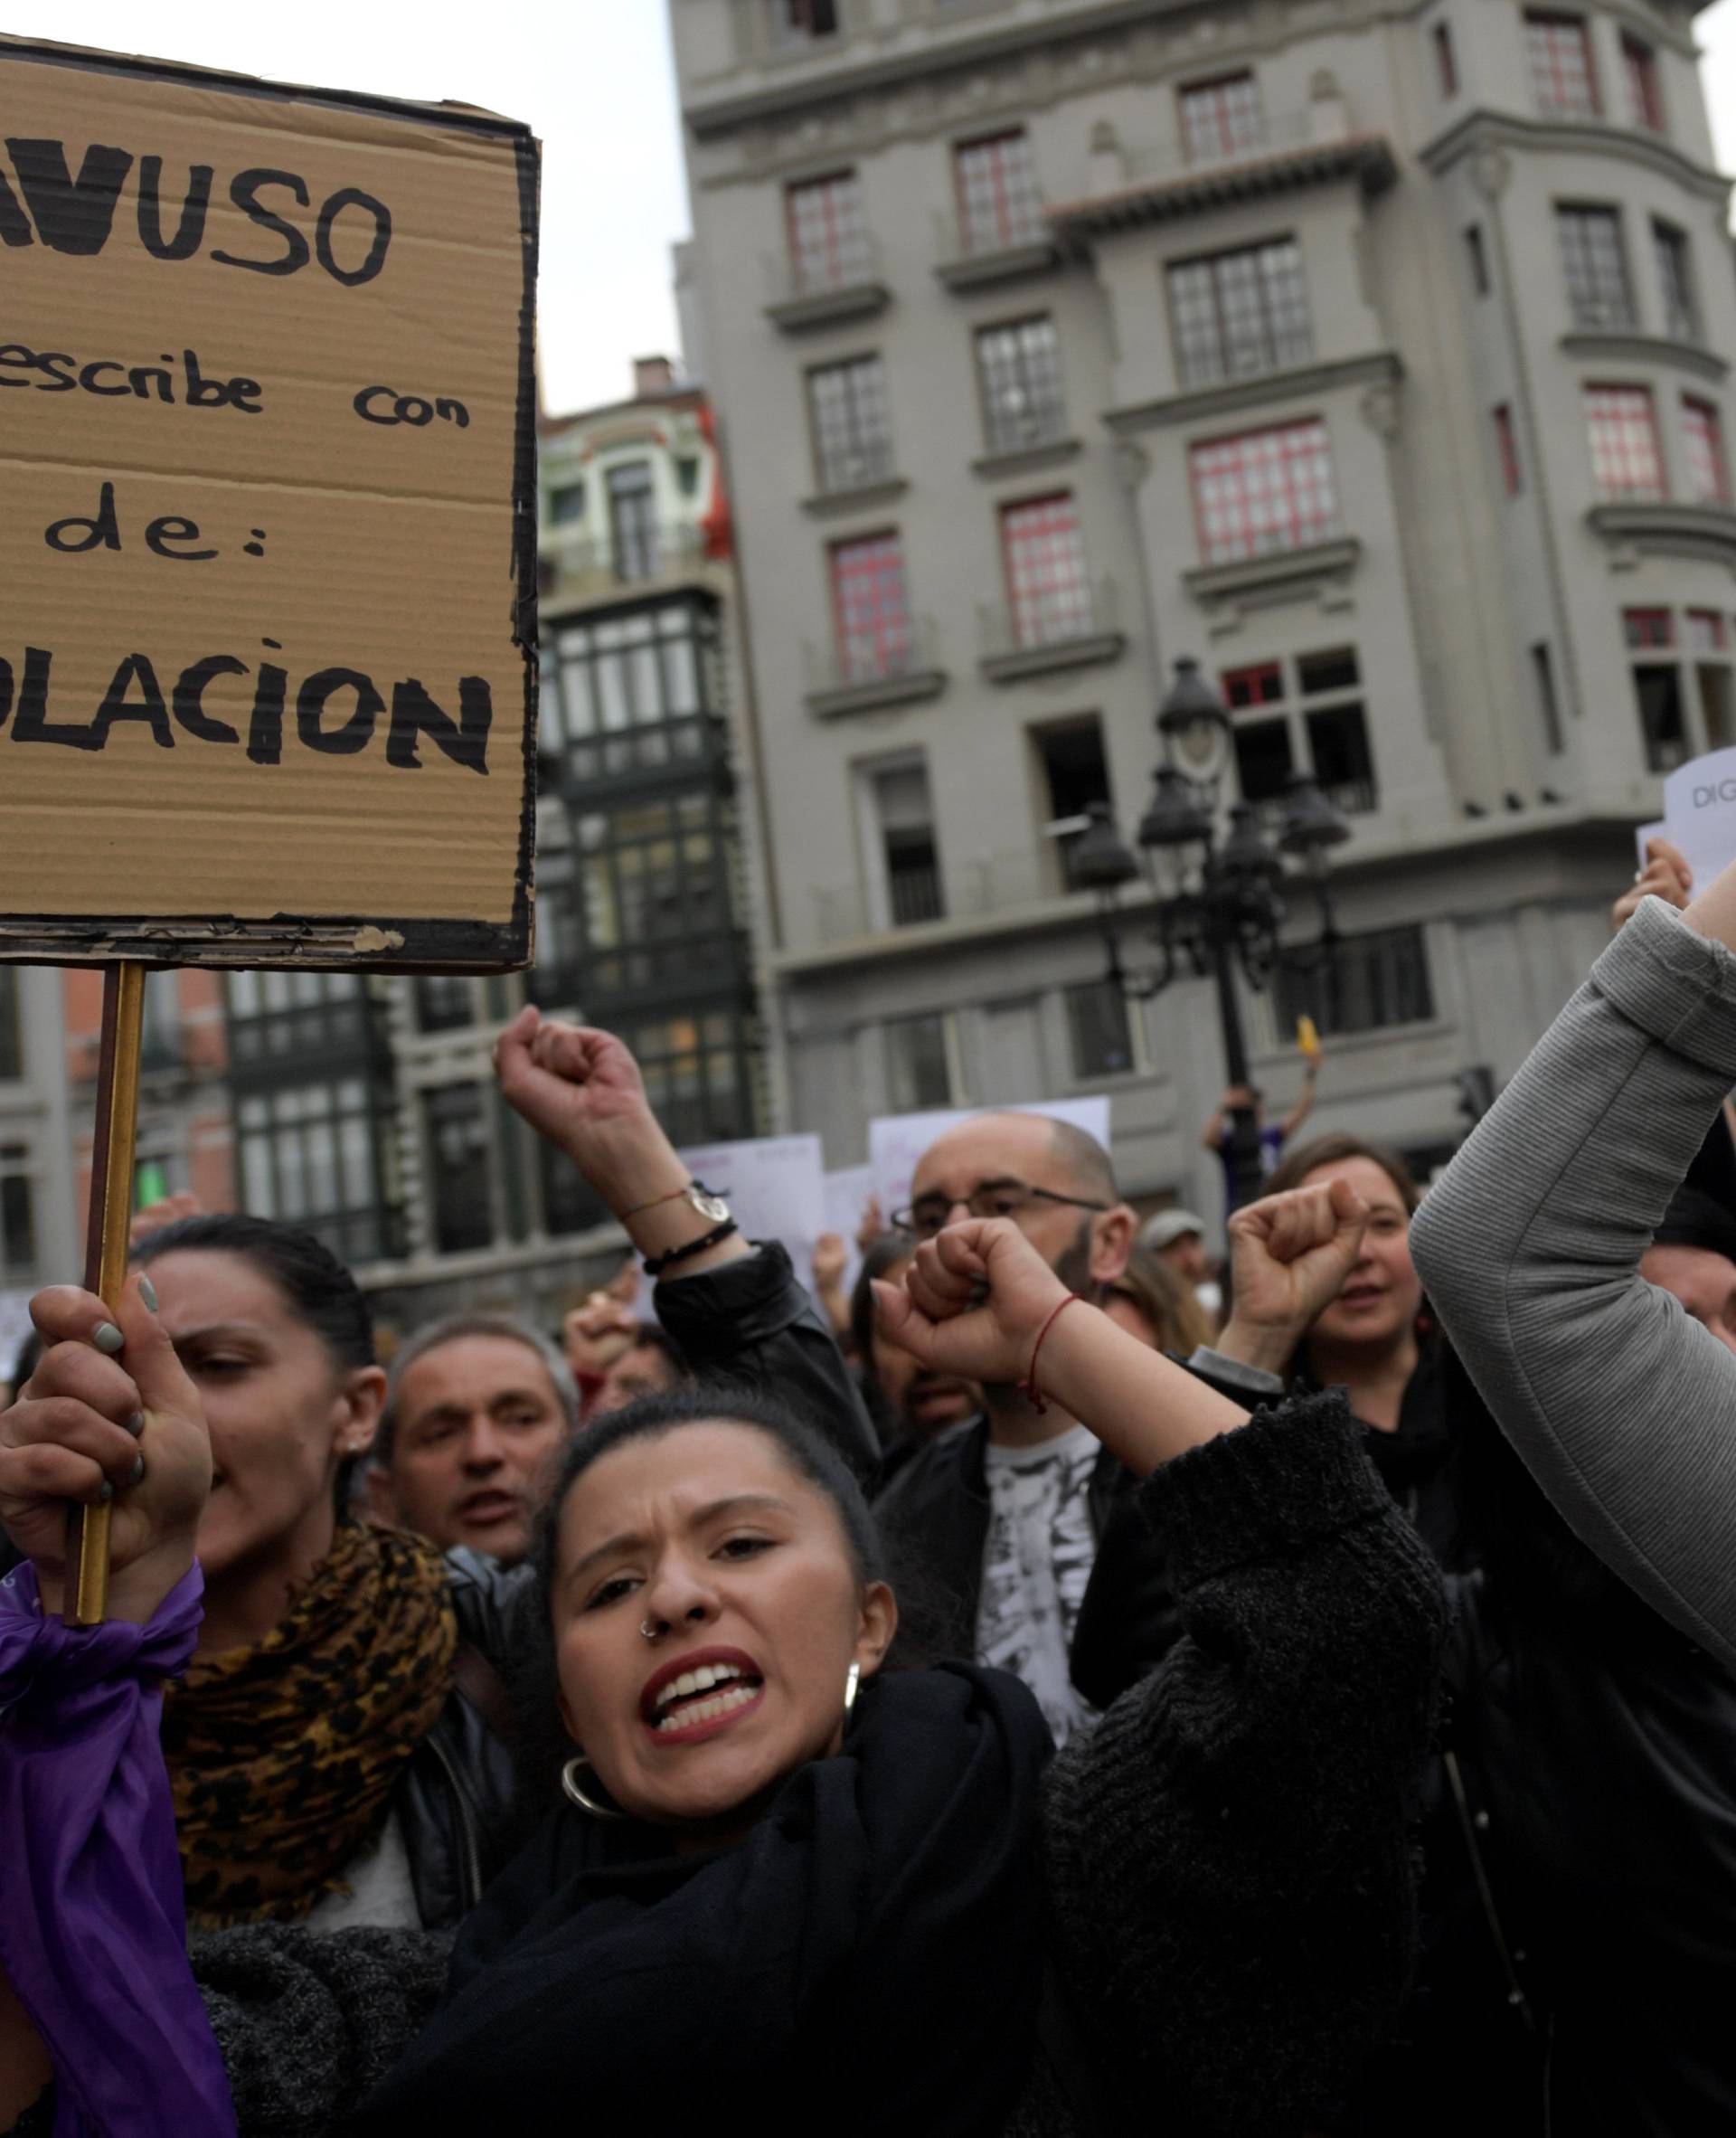 A woman cries during a protest after a Spanish court condemned five men accused of the group rape of an 18-year-old woman in Oviedo